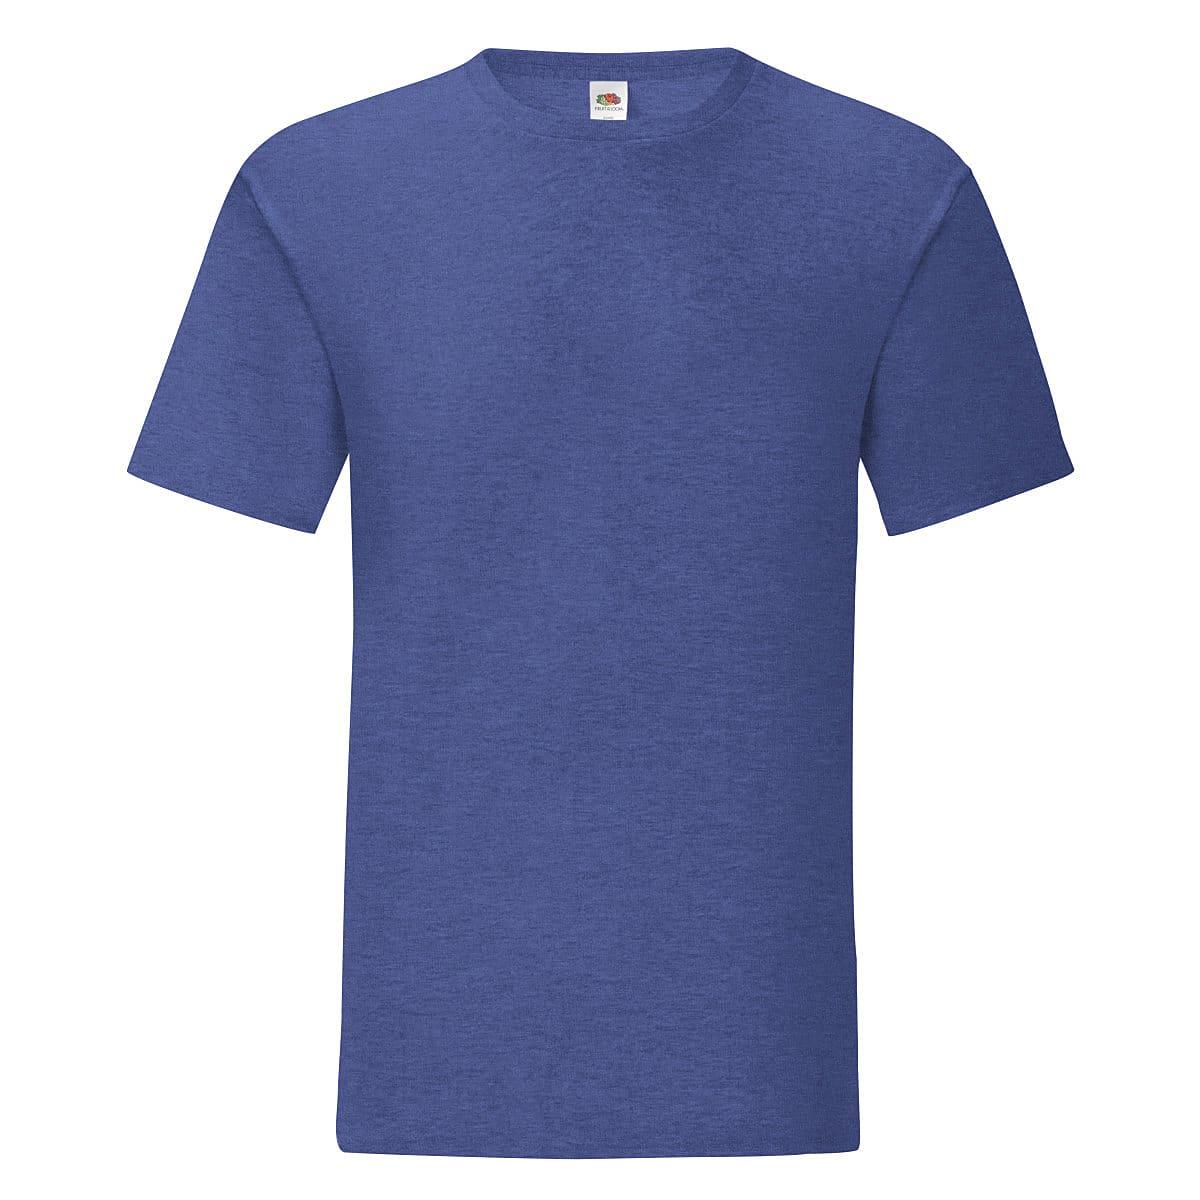 Fruit Of The Loom Mens Iconic T-Shirt in Retro Heather Royal (Product Code: 61430)